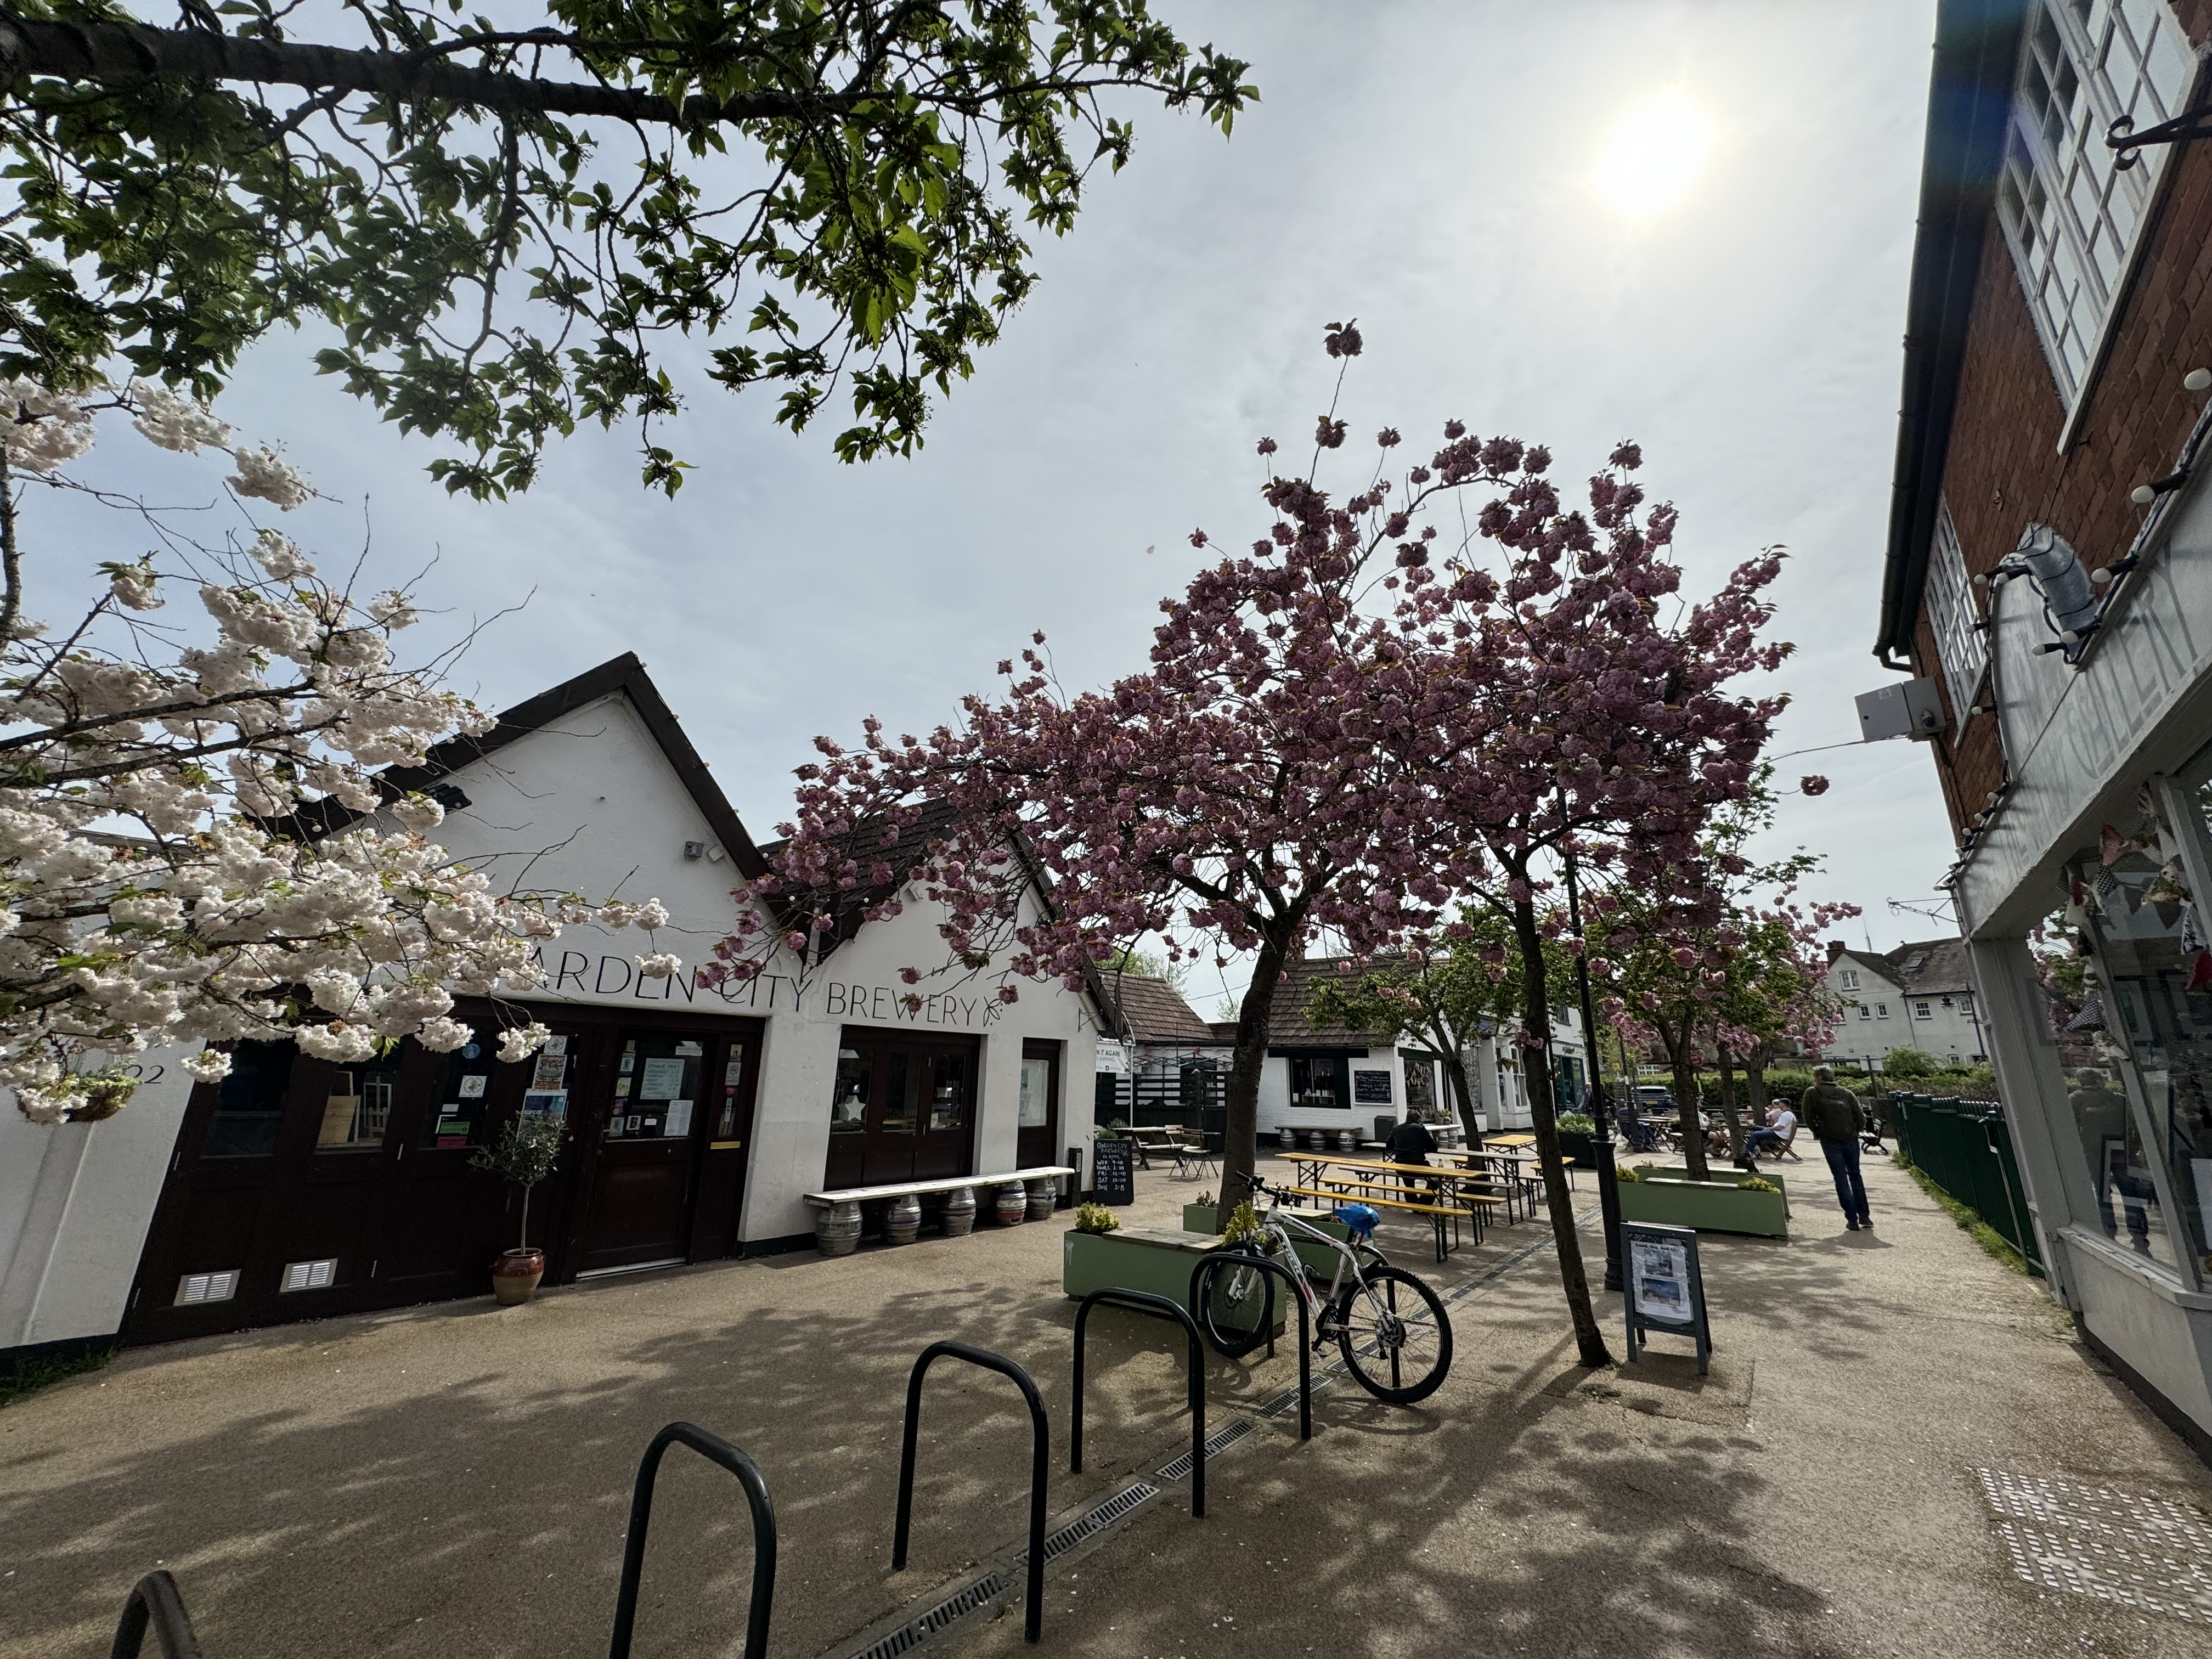 Blooming Marvellous: Catch Letchworth's wonderful cherry blossom in bloom while you can this spring. PICTURE: Letchworth Nub News visited The Wynd recently to take in the wonderful cherry blossom - why not catch the lovely sight while you can. CREDIT: Letchworth Nub News  